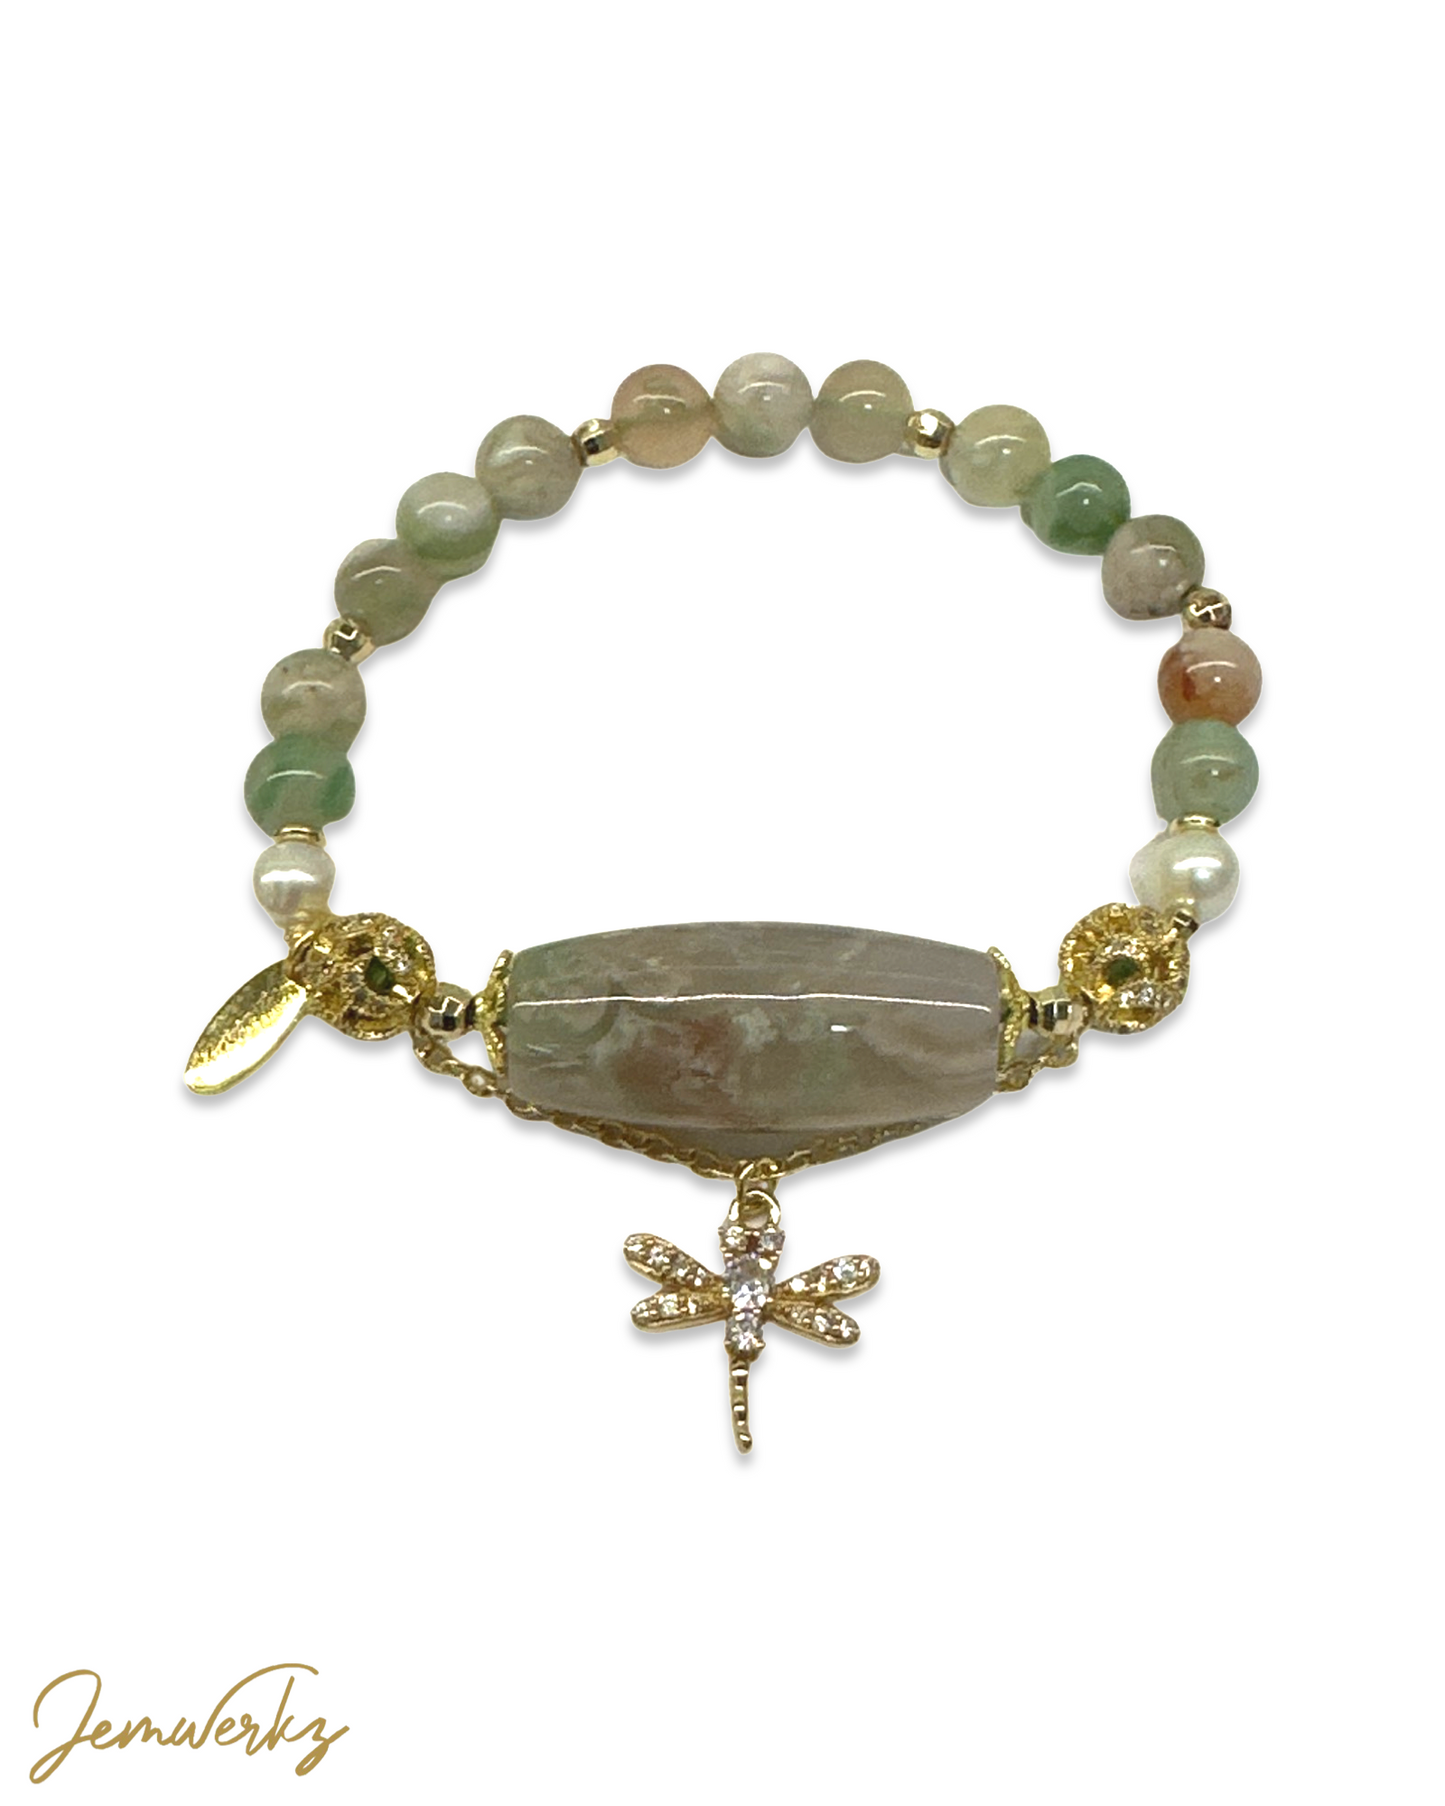 STELLA 1.0 - Green Sakura Agate Barrel Bracelet with Freshwater Pearls and Dragonfly Charm